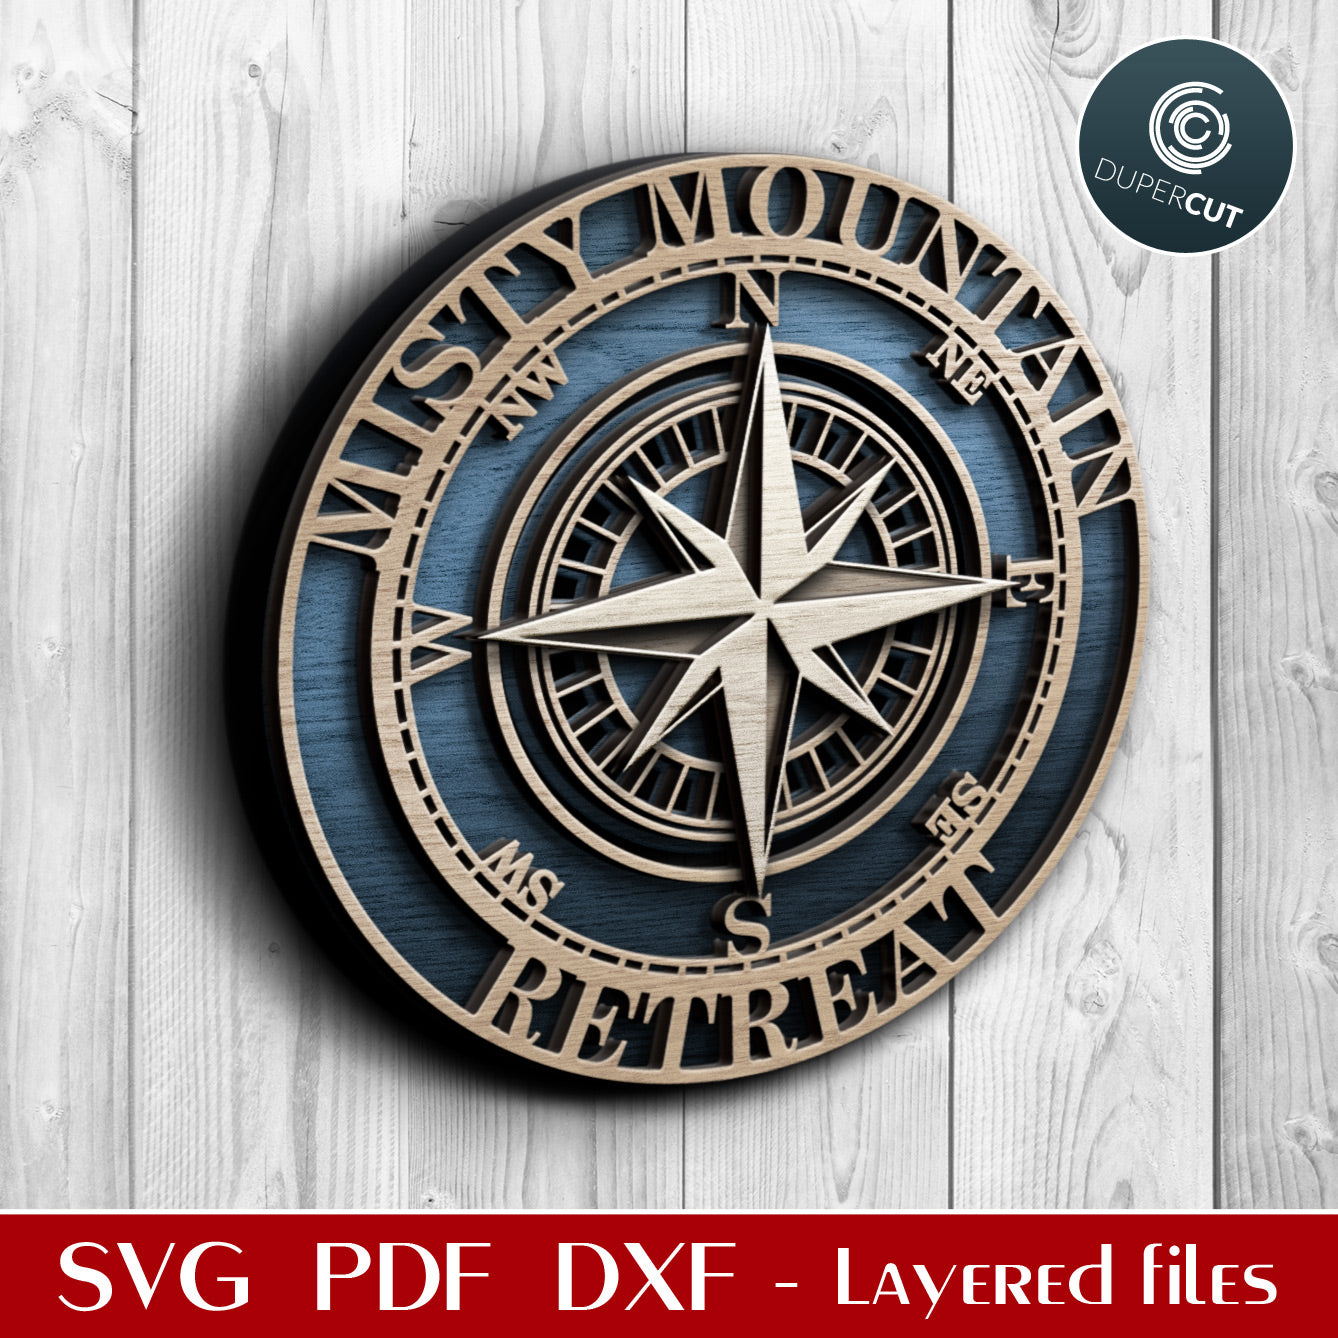 Compass layered cutting files - personalized template with editable text - SVG PDF DXF vector files for Cricut, Silhouette Cameo, Glowforge, CNC plasma machines